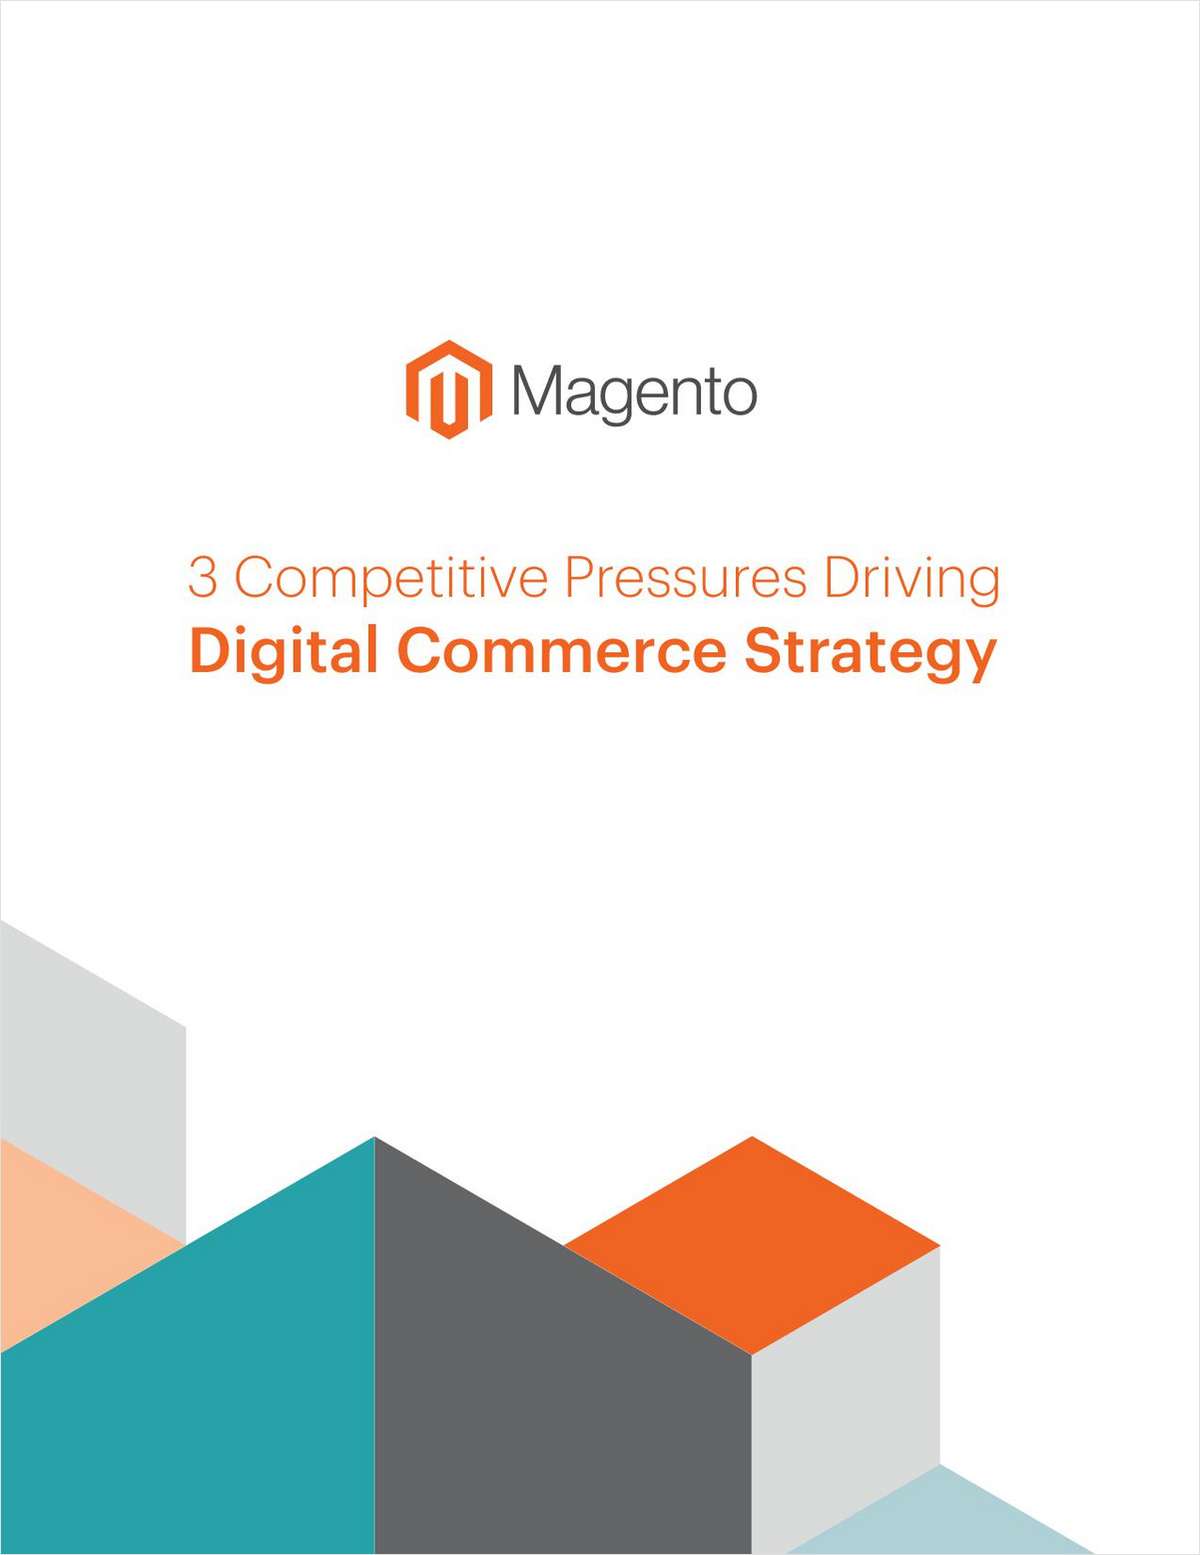 3 Competitive Pressures Driving Digital Commerce Strategy